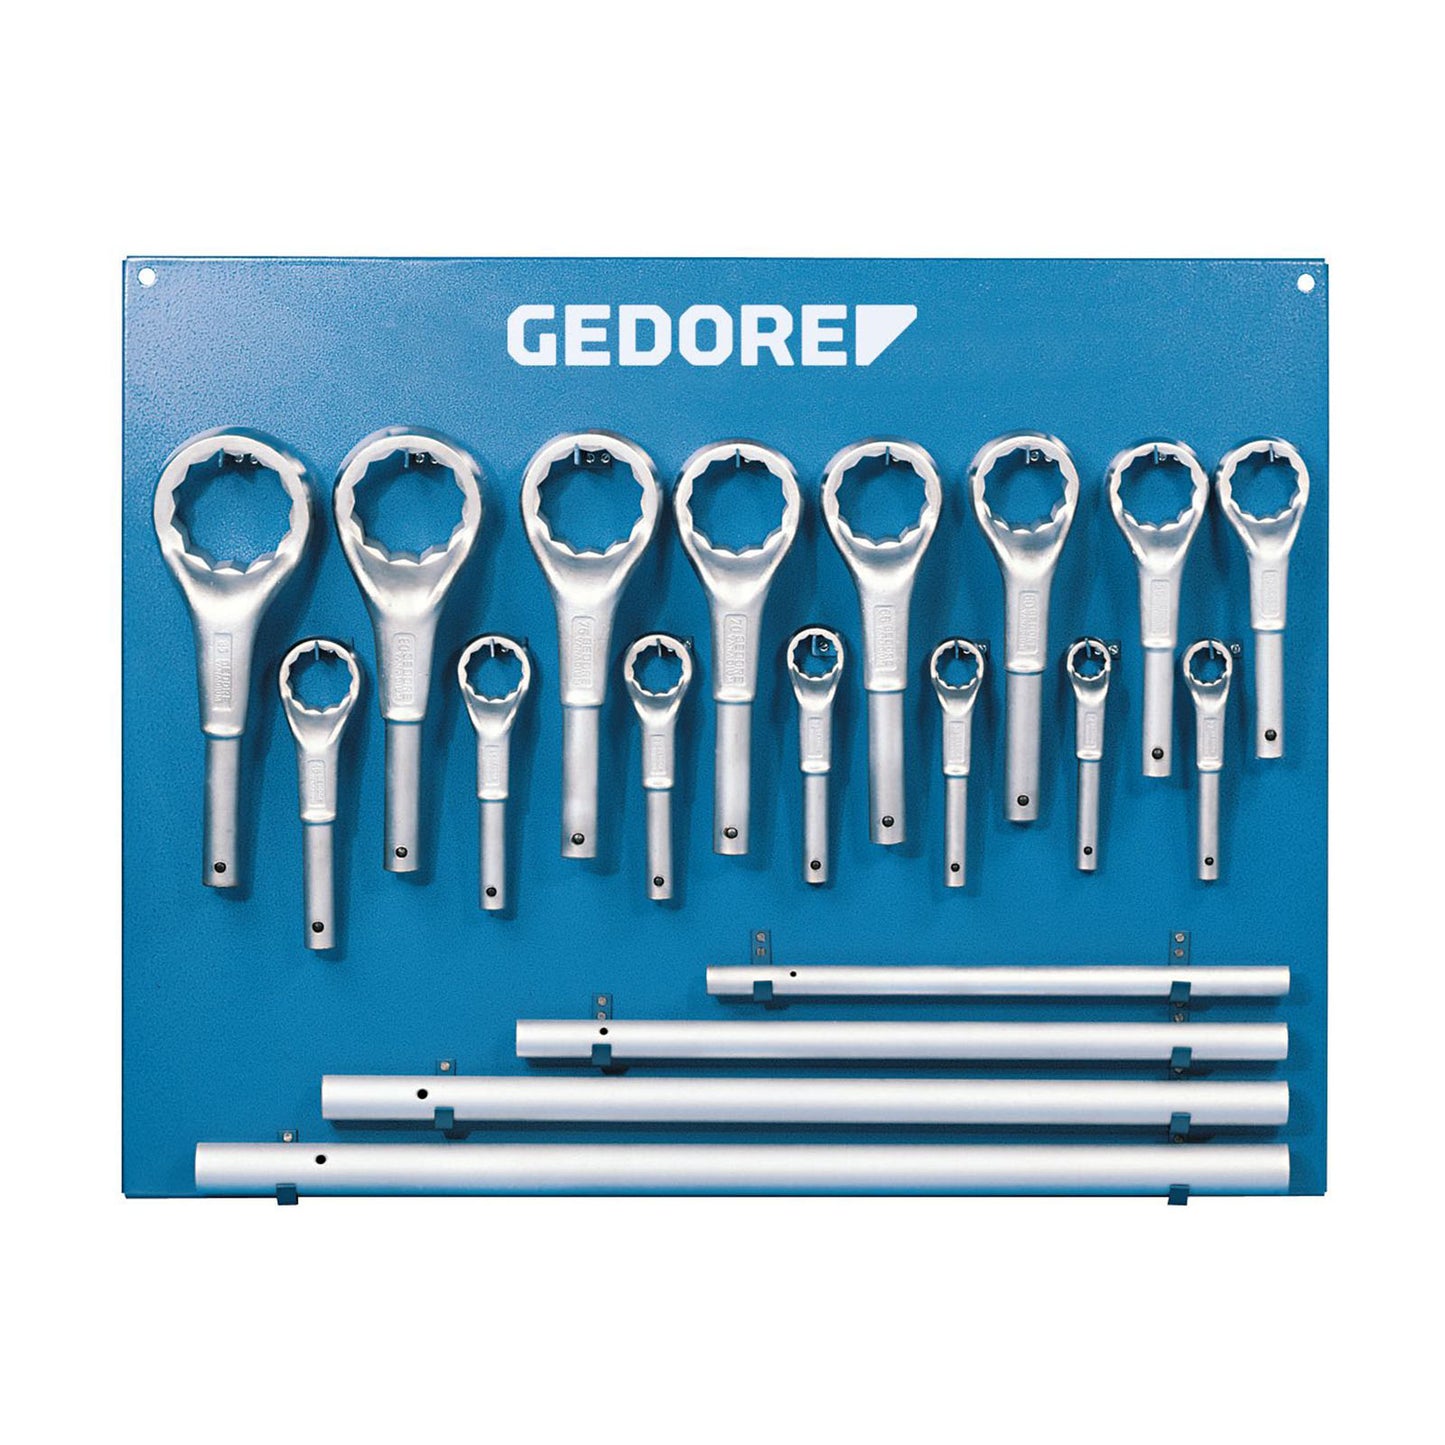 GEDORE 2 ATM - Panel with Key Set - 2 ATM (6049250)